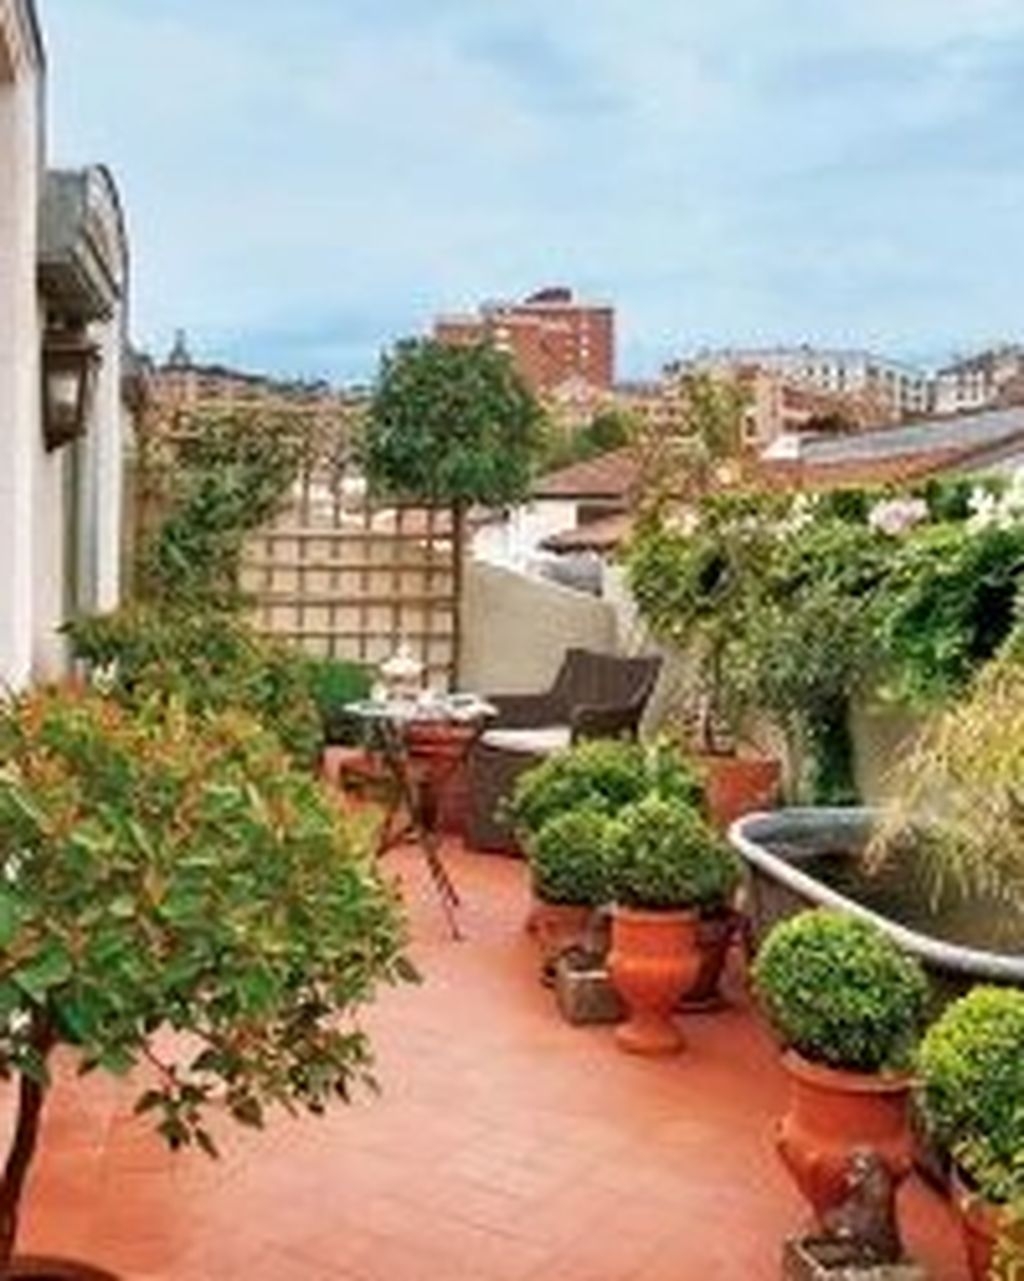 Most Popular And Beautiful Rooftop Garden15